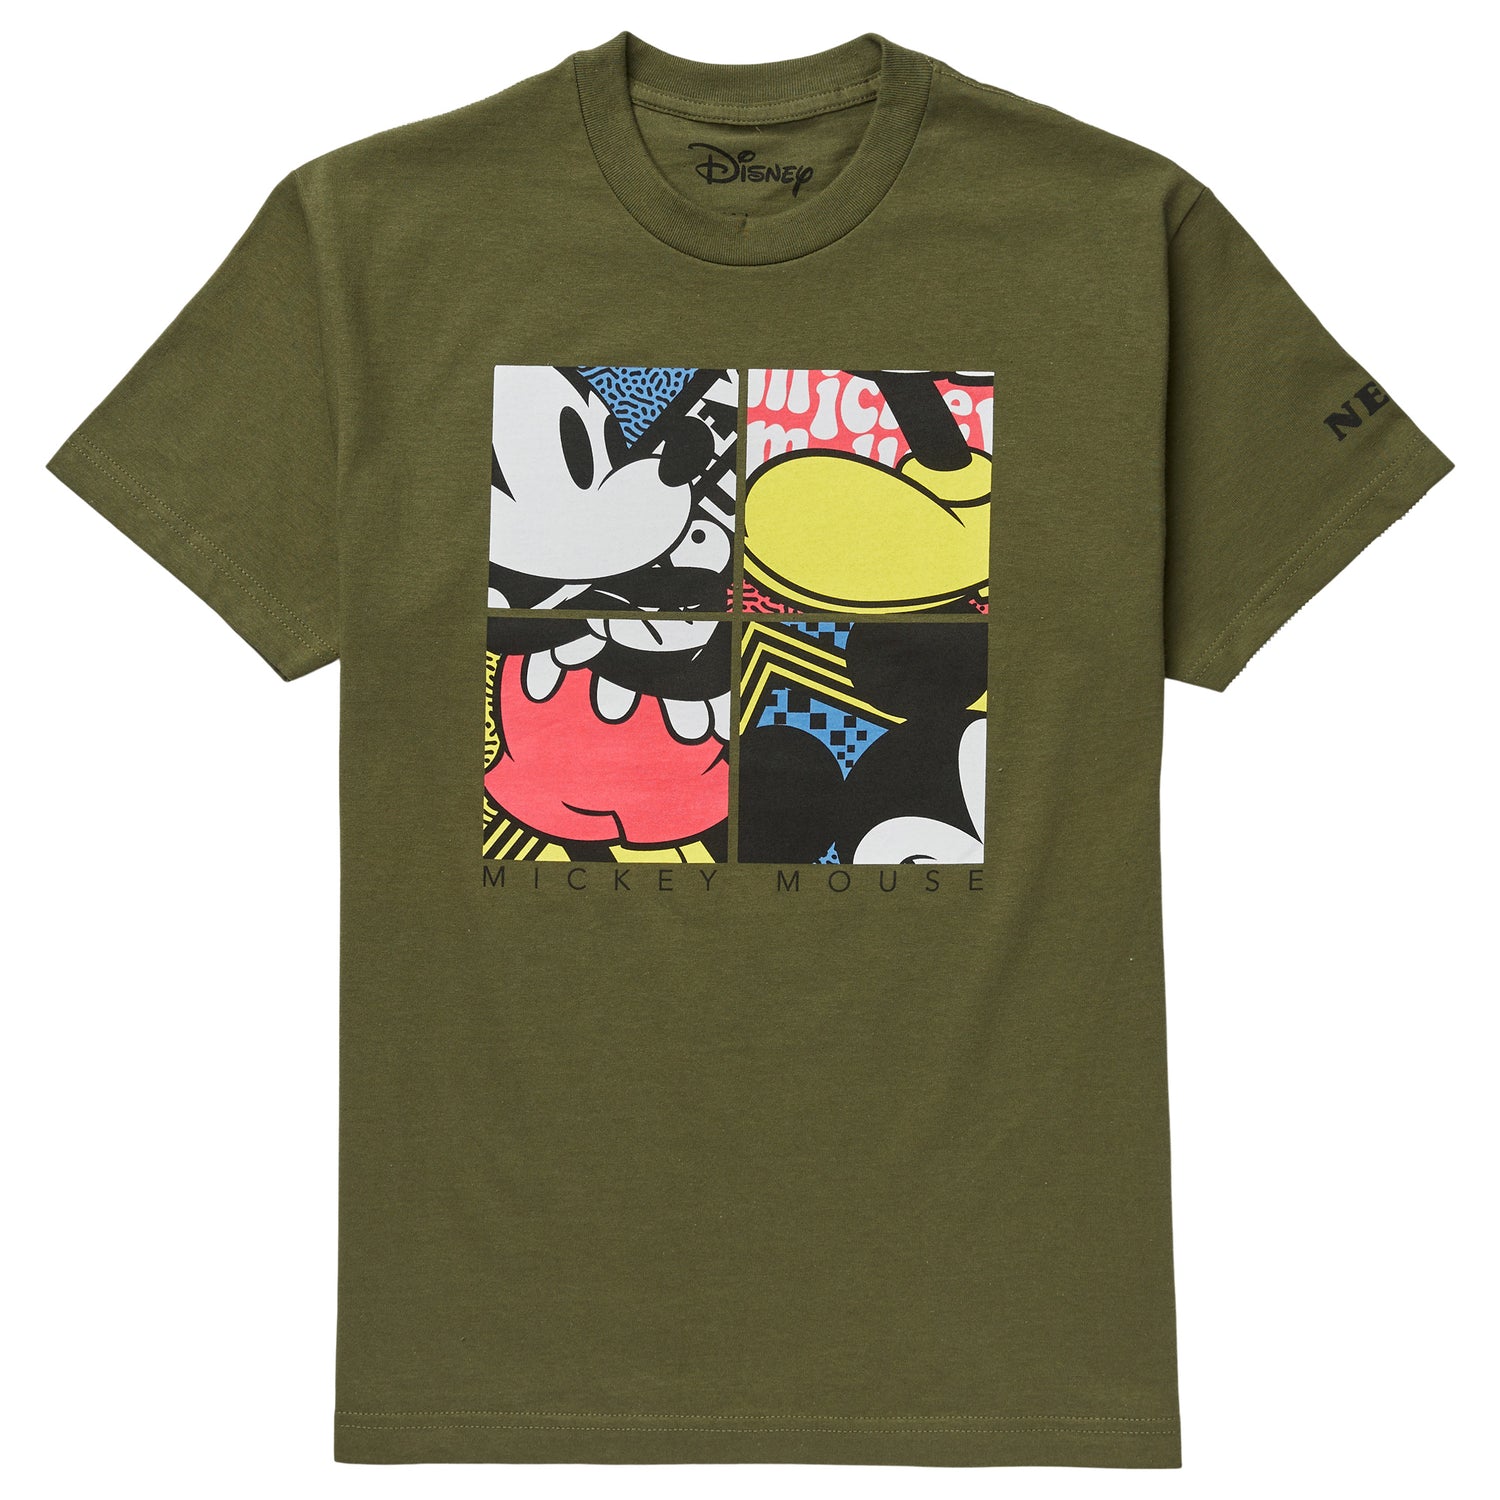 MICKEY MOUSE SQUARE TEE - MILITARY